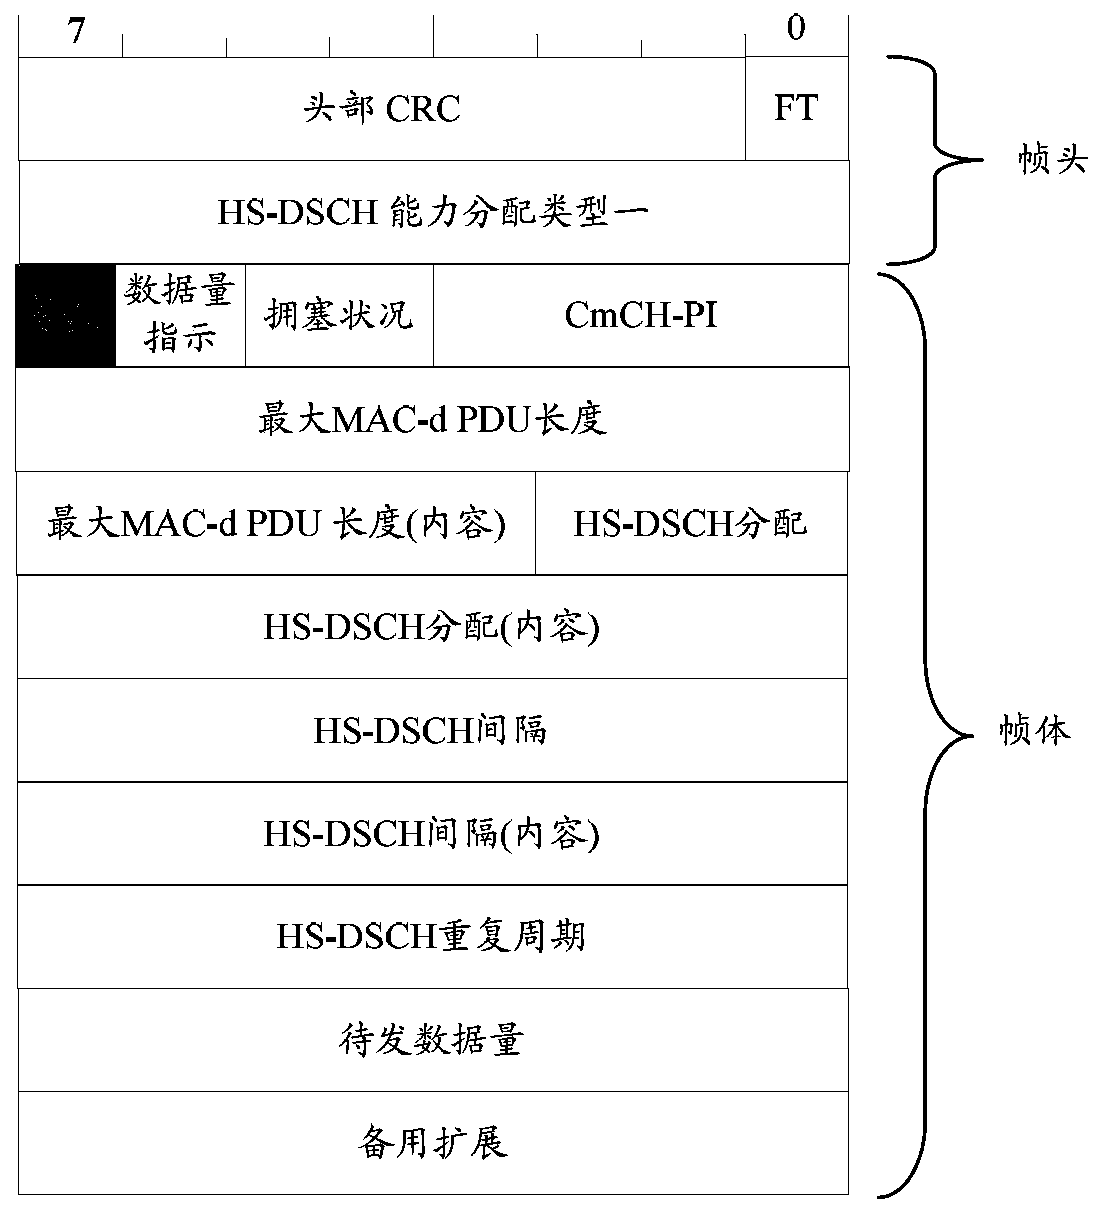 A method, system and device for optimizing high-speed downlink packet access to multiple streams